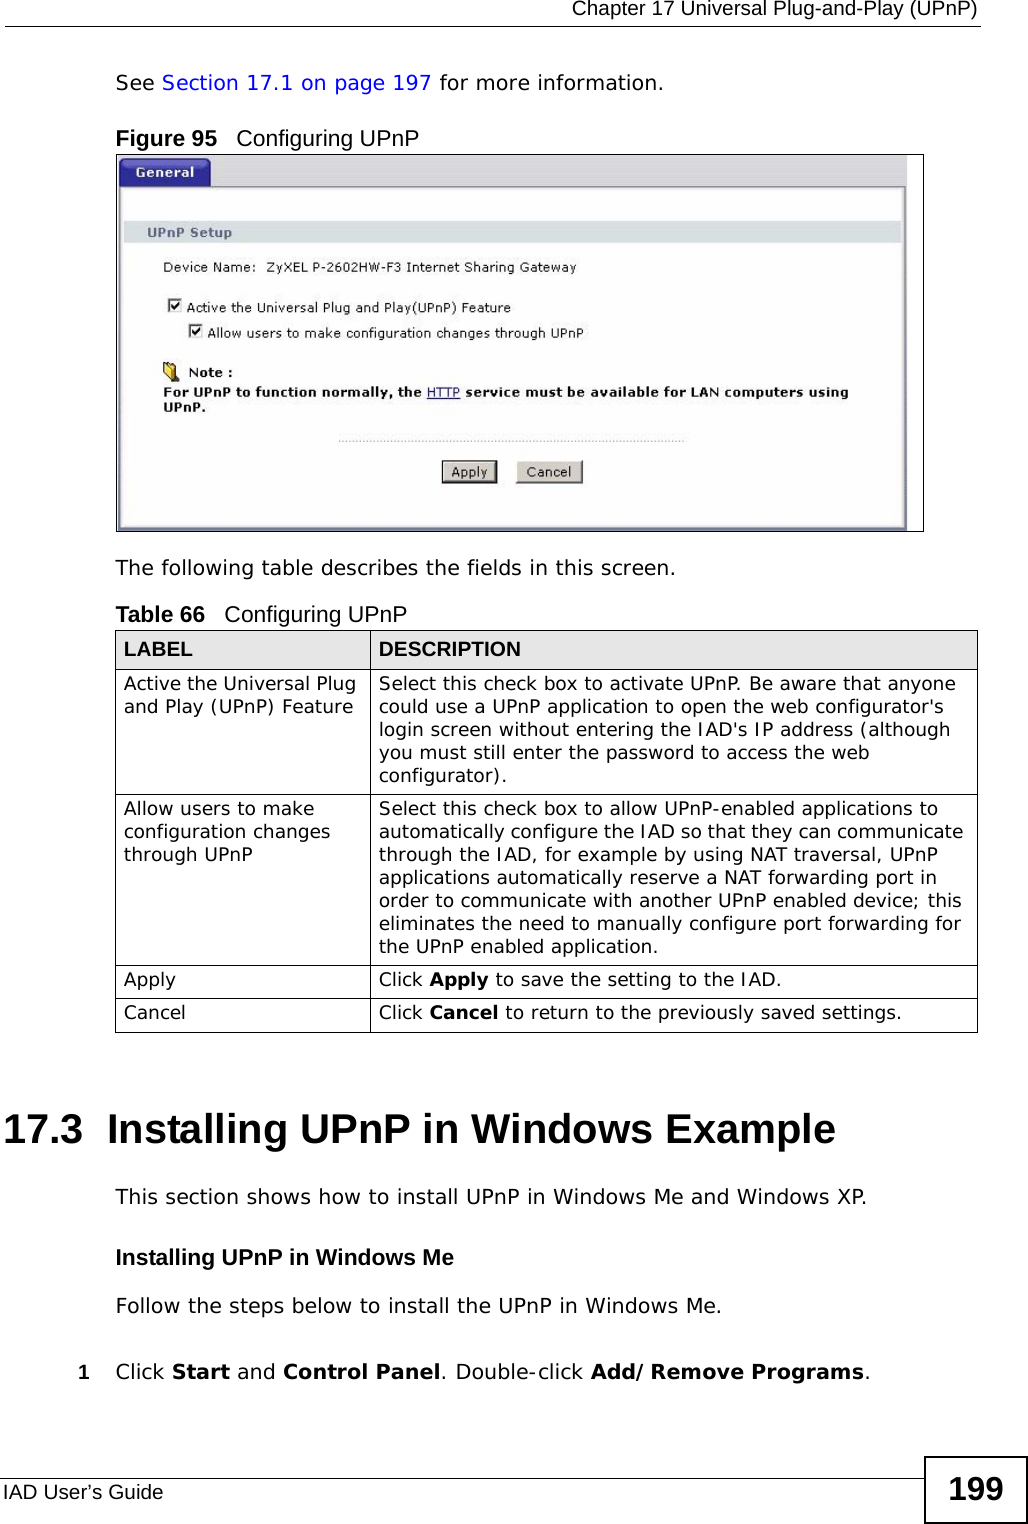  Chapter 17 Universal Plug-and-Play (UPnP)IAD User’s Guide 199See Section 17.1 on page 197 for more information. Figure 95   Configuring UPnPThe following table describes the fields in this screen. 17.3  Installing UPnP in Windows ExampleThis section shows how to install UPnP in Windows Me and Windows XP.  Installing UPnP in Windows MeFollow the steps below to install the UPnP in Windows Me. 1Click Start and Control Panel. Double-click Add/Remove Programs.Table 66   Configuring UPnPLABEL DESCRIPTIONActive the Universal Plug and Play (UPnP) Feature Select this check box to activate UPnP. Be aware that anyone could use a UPnP application to open the web configurator&apos;s login screen without entering the IAD&apos;s IP address (although you must still enter the password to access the web configurator).Allow users to make configuration changes through UPnPSelect this check box to allow UPnP-enabled applications to automatically configure the IAD so that they can communicate through the IAD, for example by using NAT traversal, UPnP applications automatically reserve a NAT forwarding port in order to communicate with another UPnP enabled device; this eliminates the need to manually configure port forwarding for the UPnP enabled application. Apply Click Apply to save the setting to the IAD.Cancel Click Cancel to return to the previously saved settings.